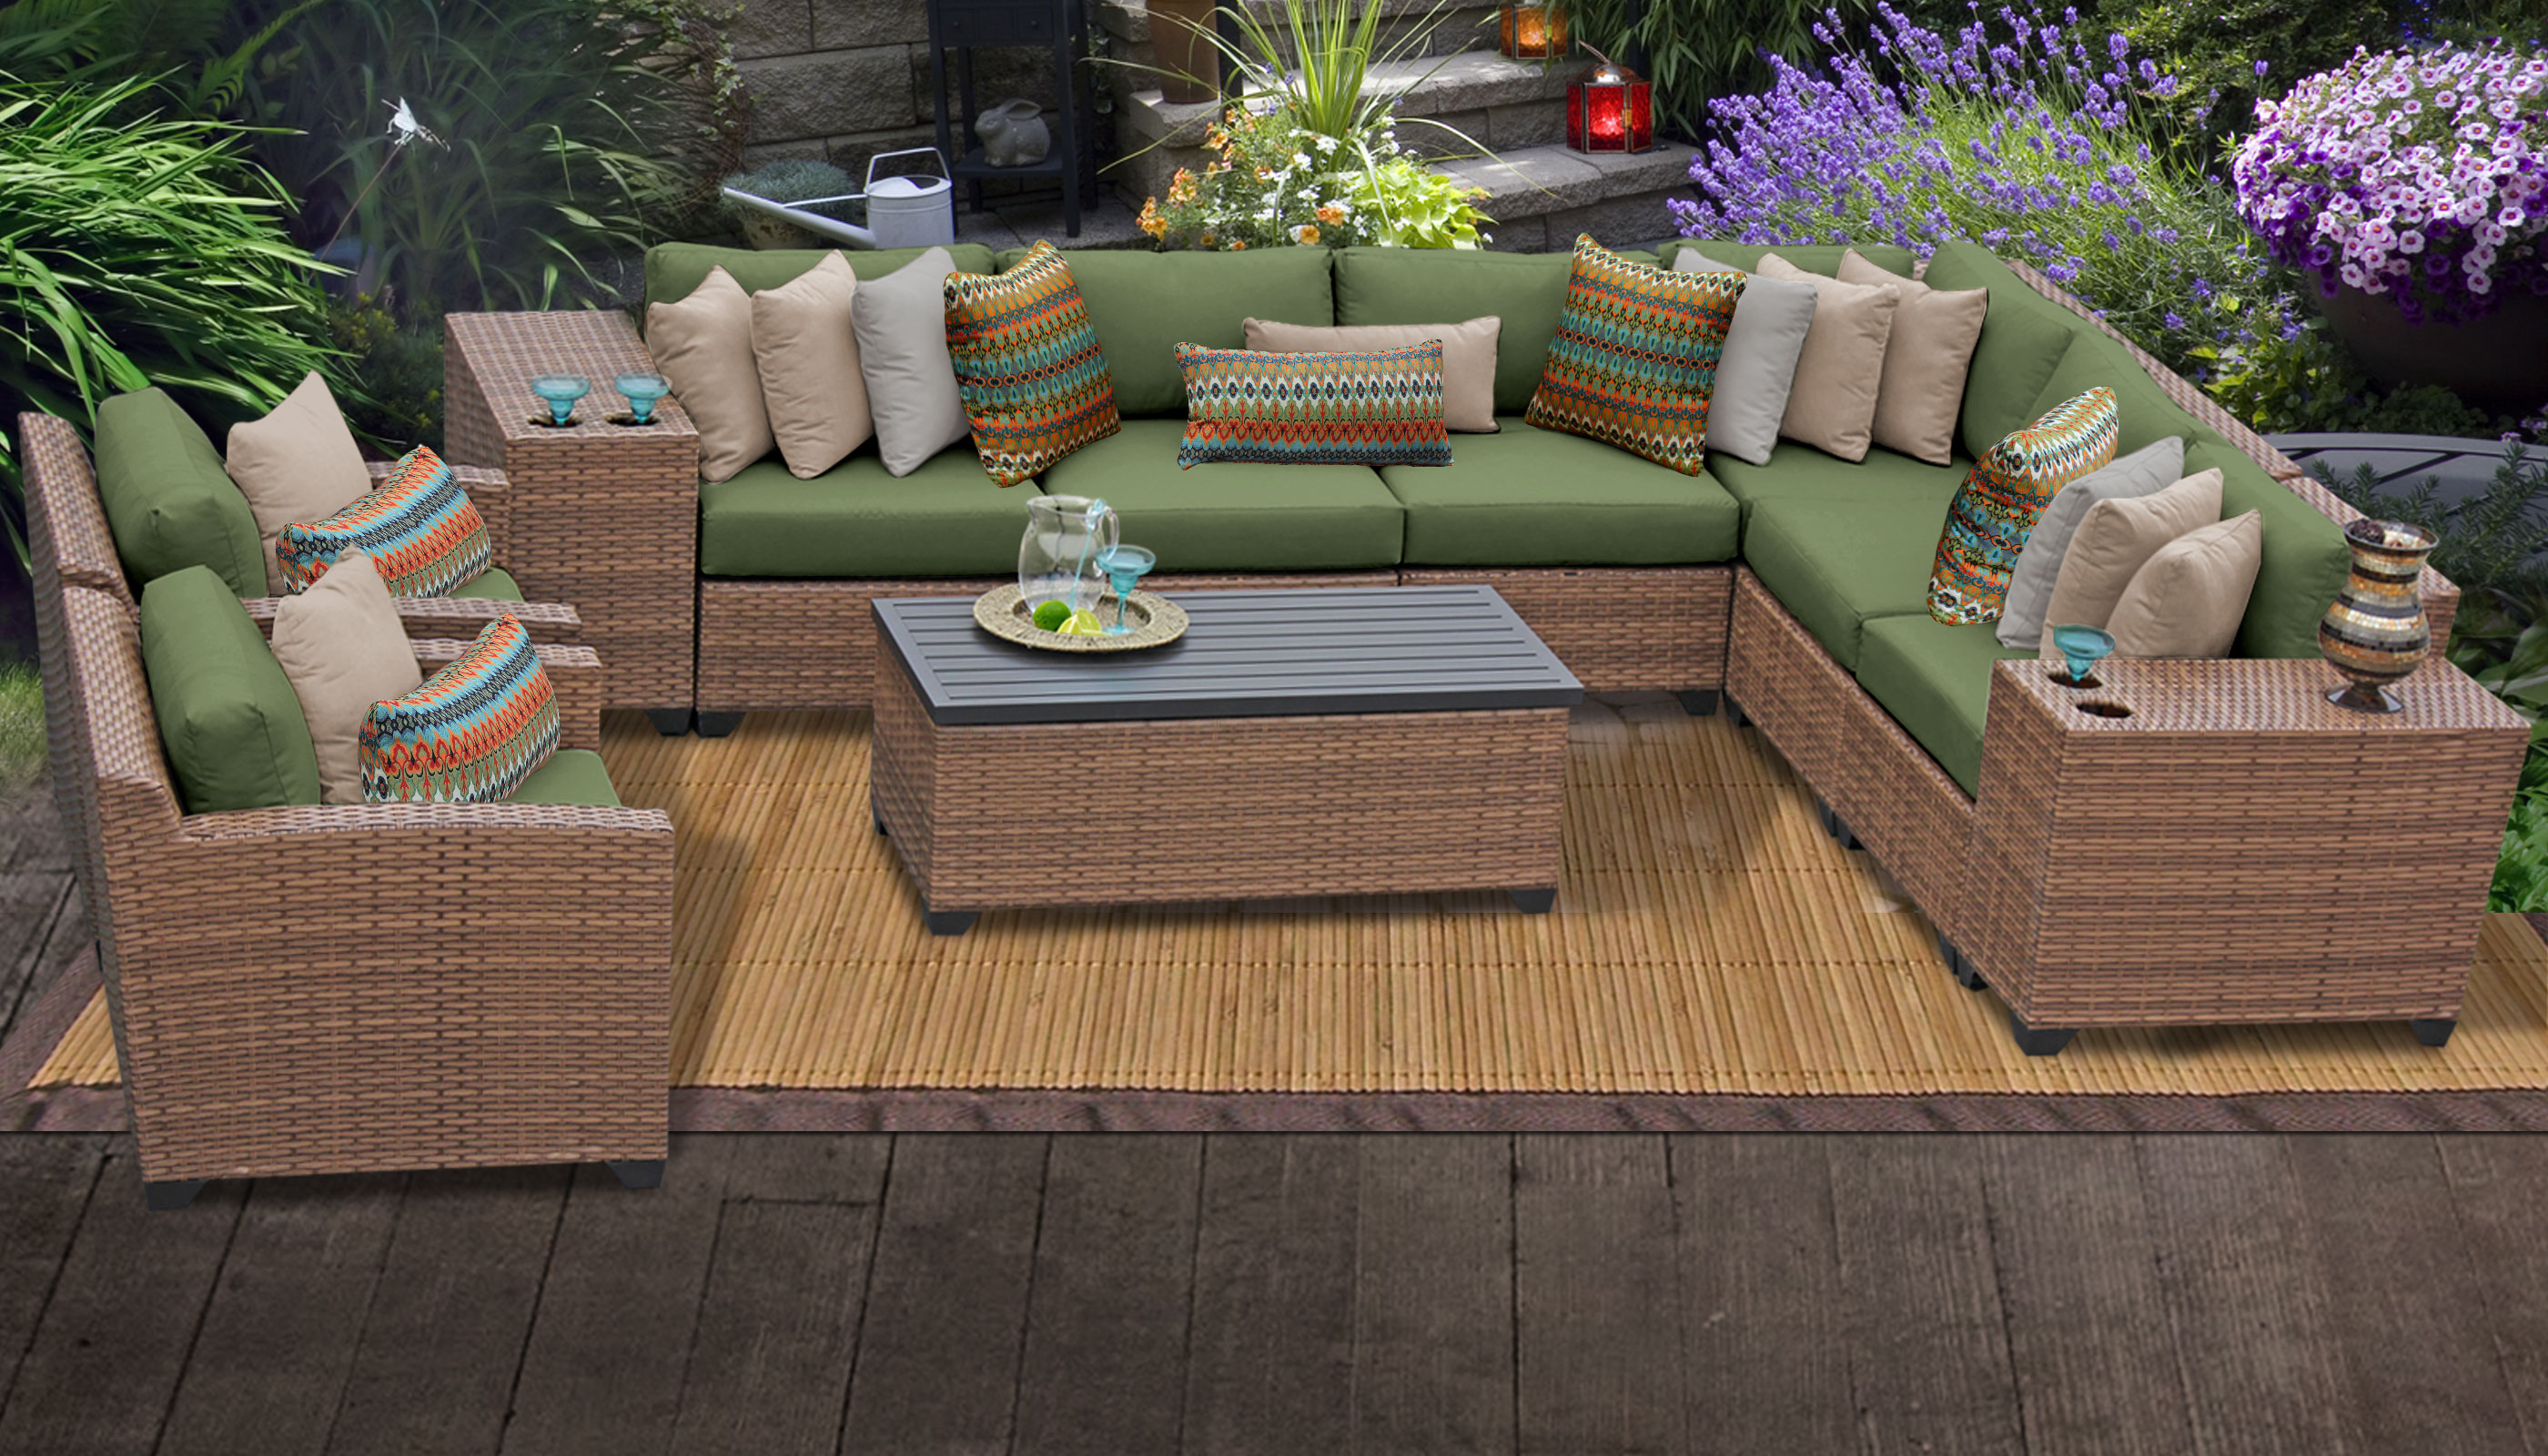 Used Outdoor Patio Furniture - Patio and Outdoor Furniture Sets | RST ...